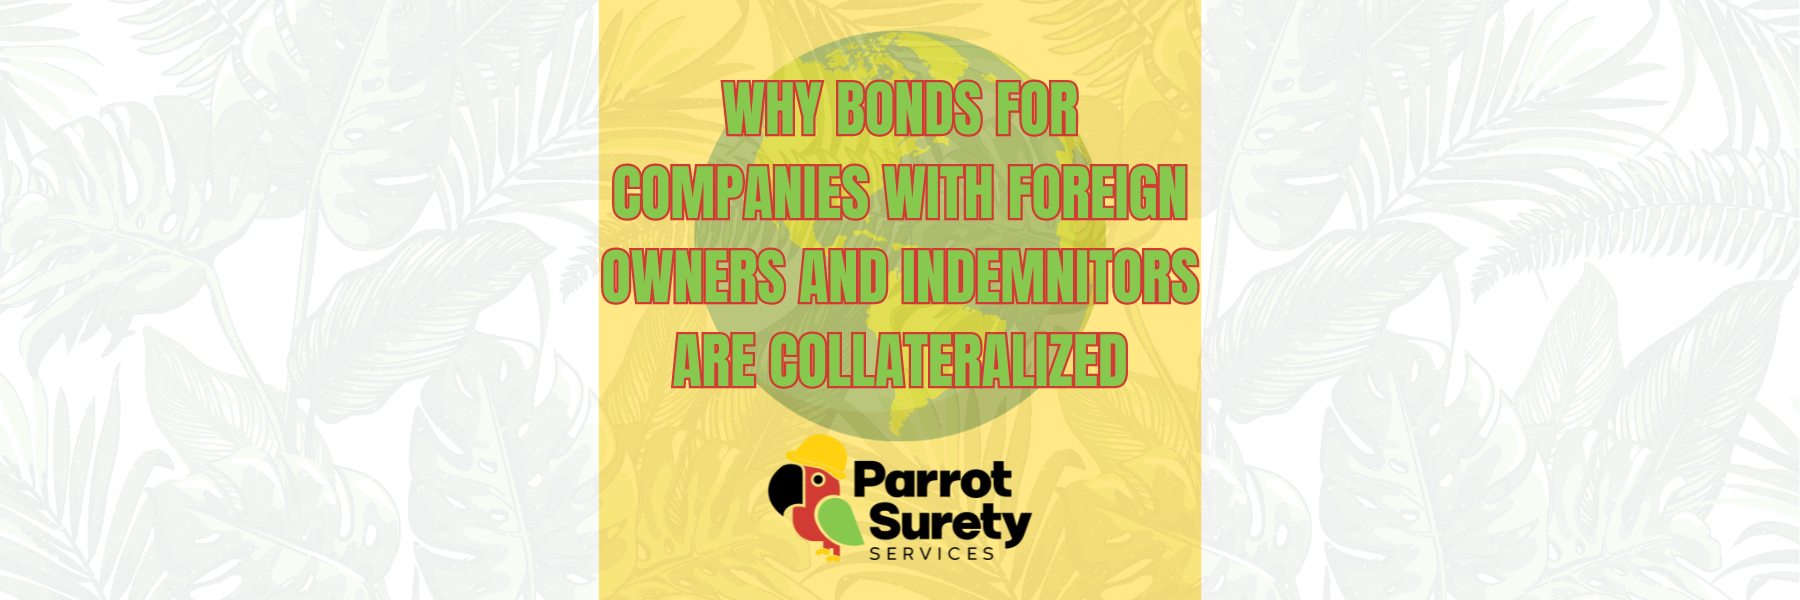 Why Bonds for Companies with Foreign Owners and Indemnitors Are Collateralized title image